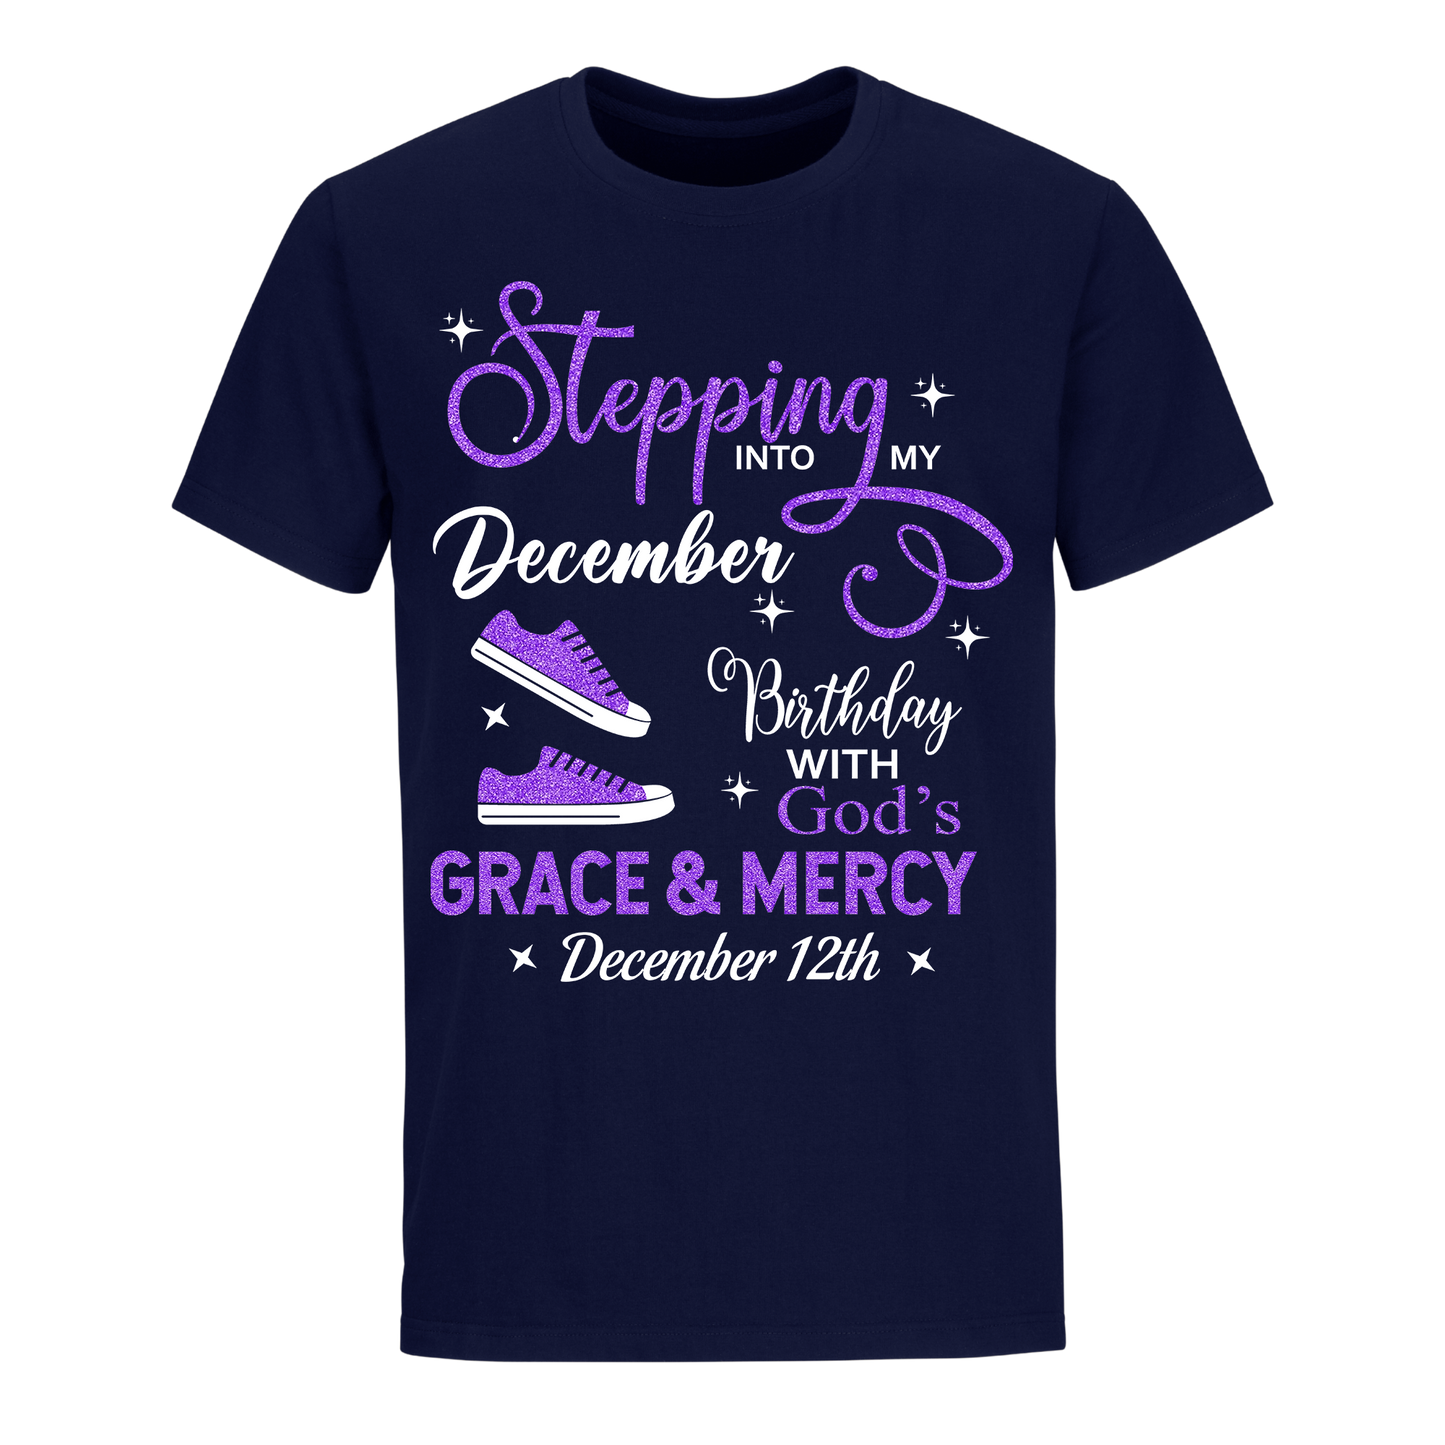 DECEMBER 12 GRACE AND MERCY